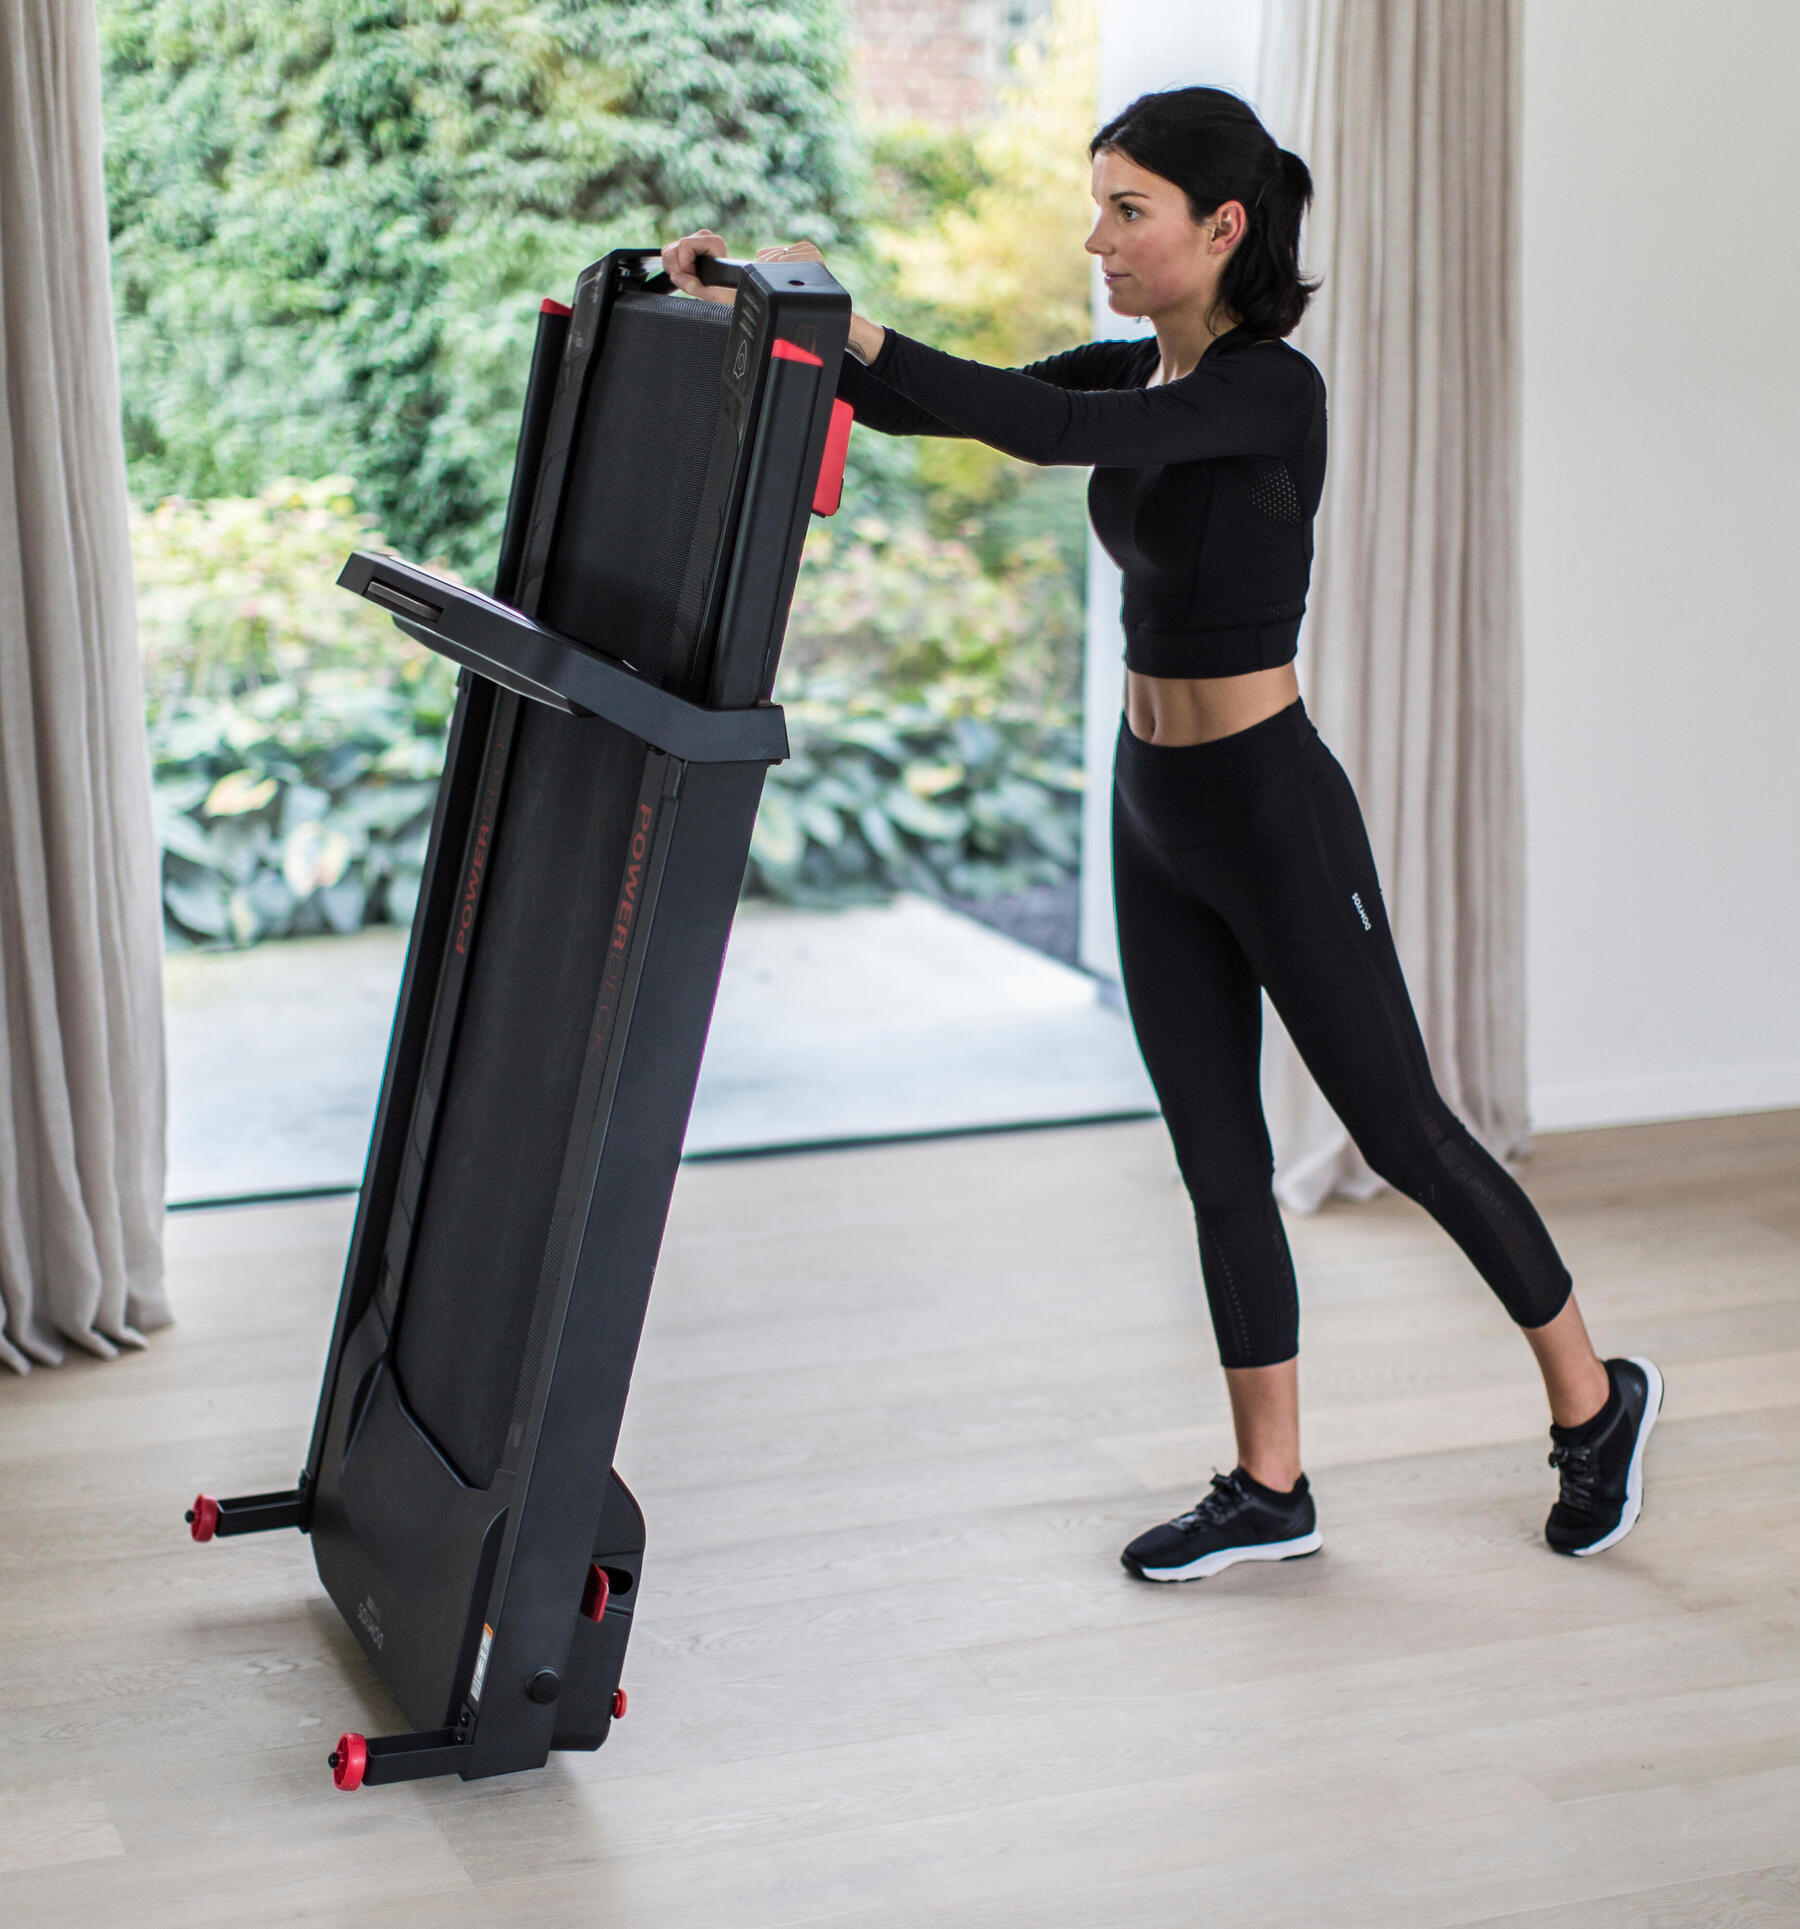 How to work out and build your at-home gym